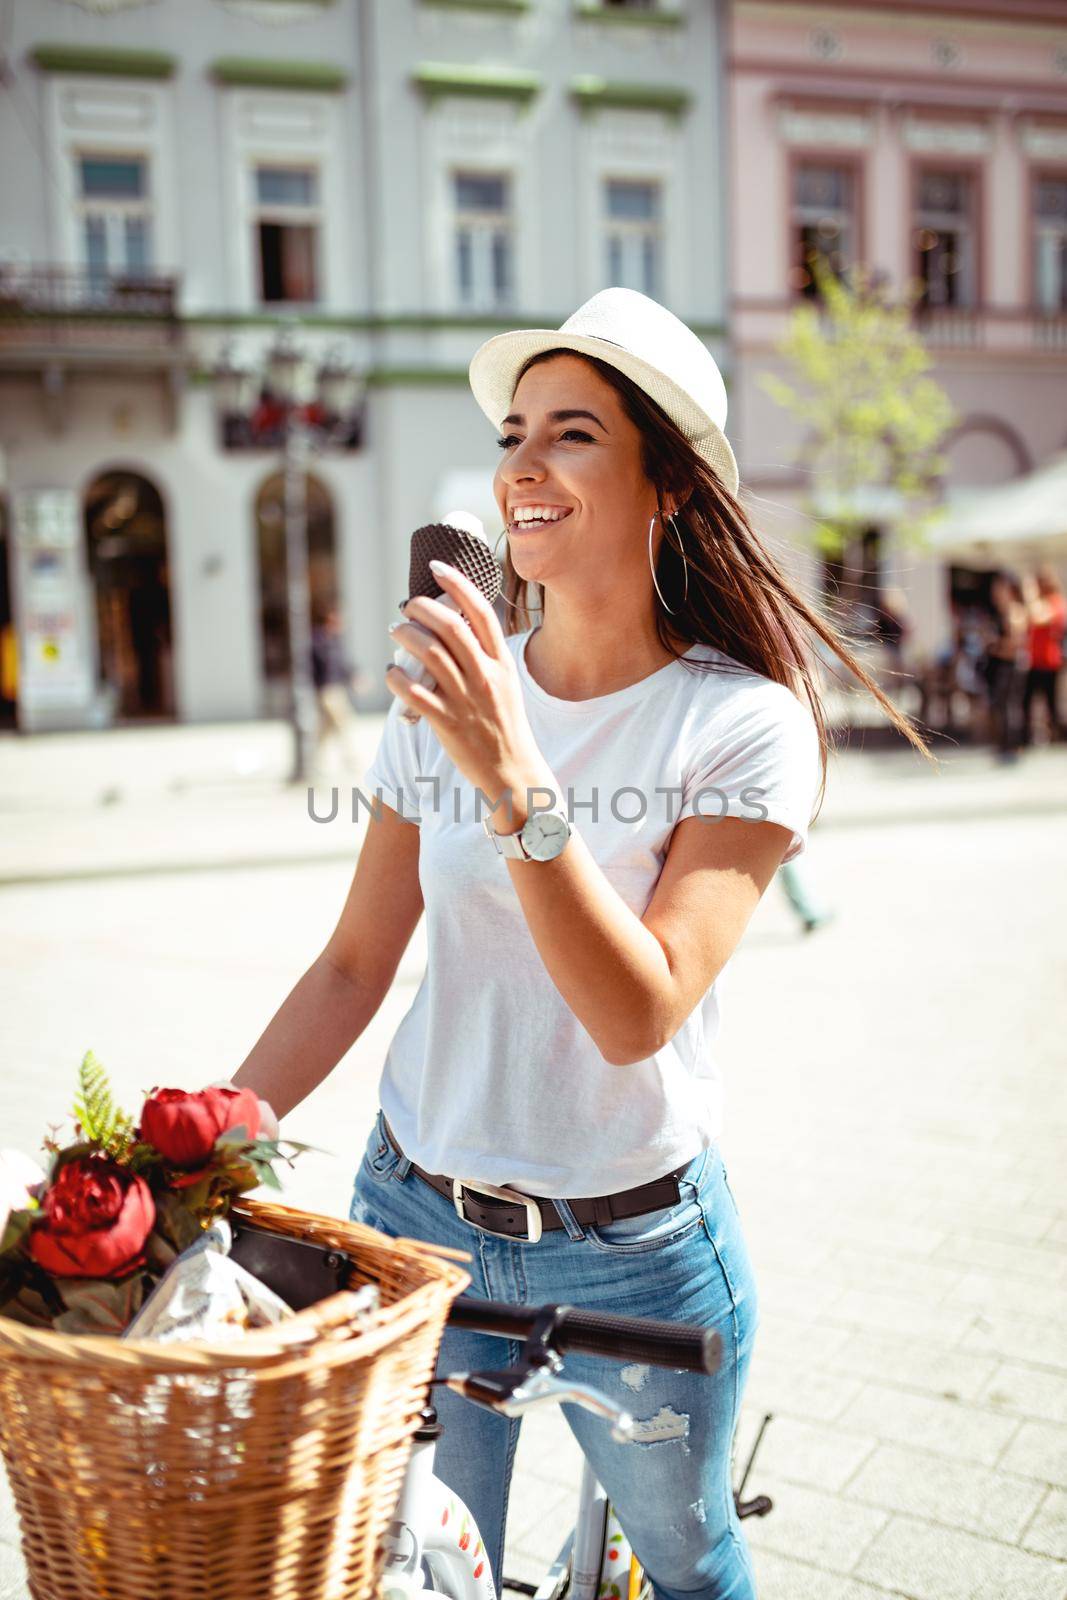 Smiling young woman with ice cream, taking break on a city square on a sunny day, beside the bike with flower basket.